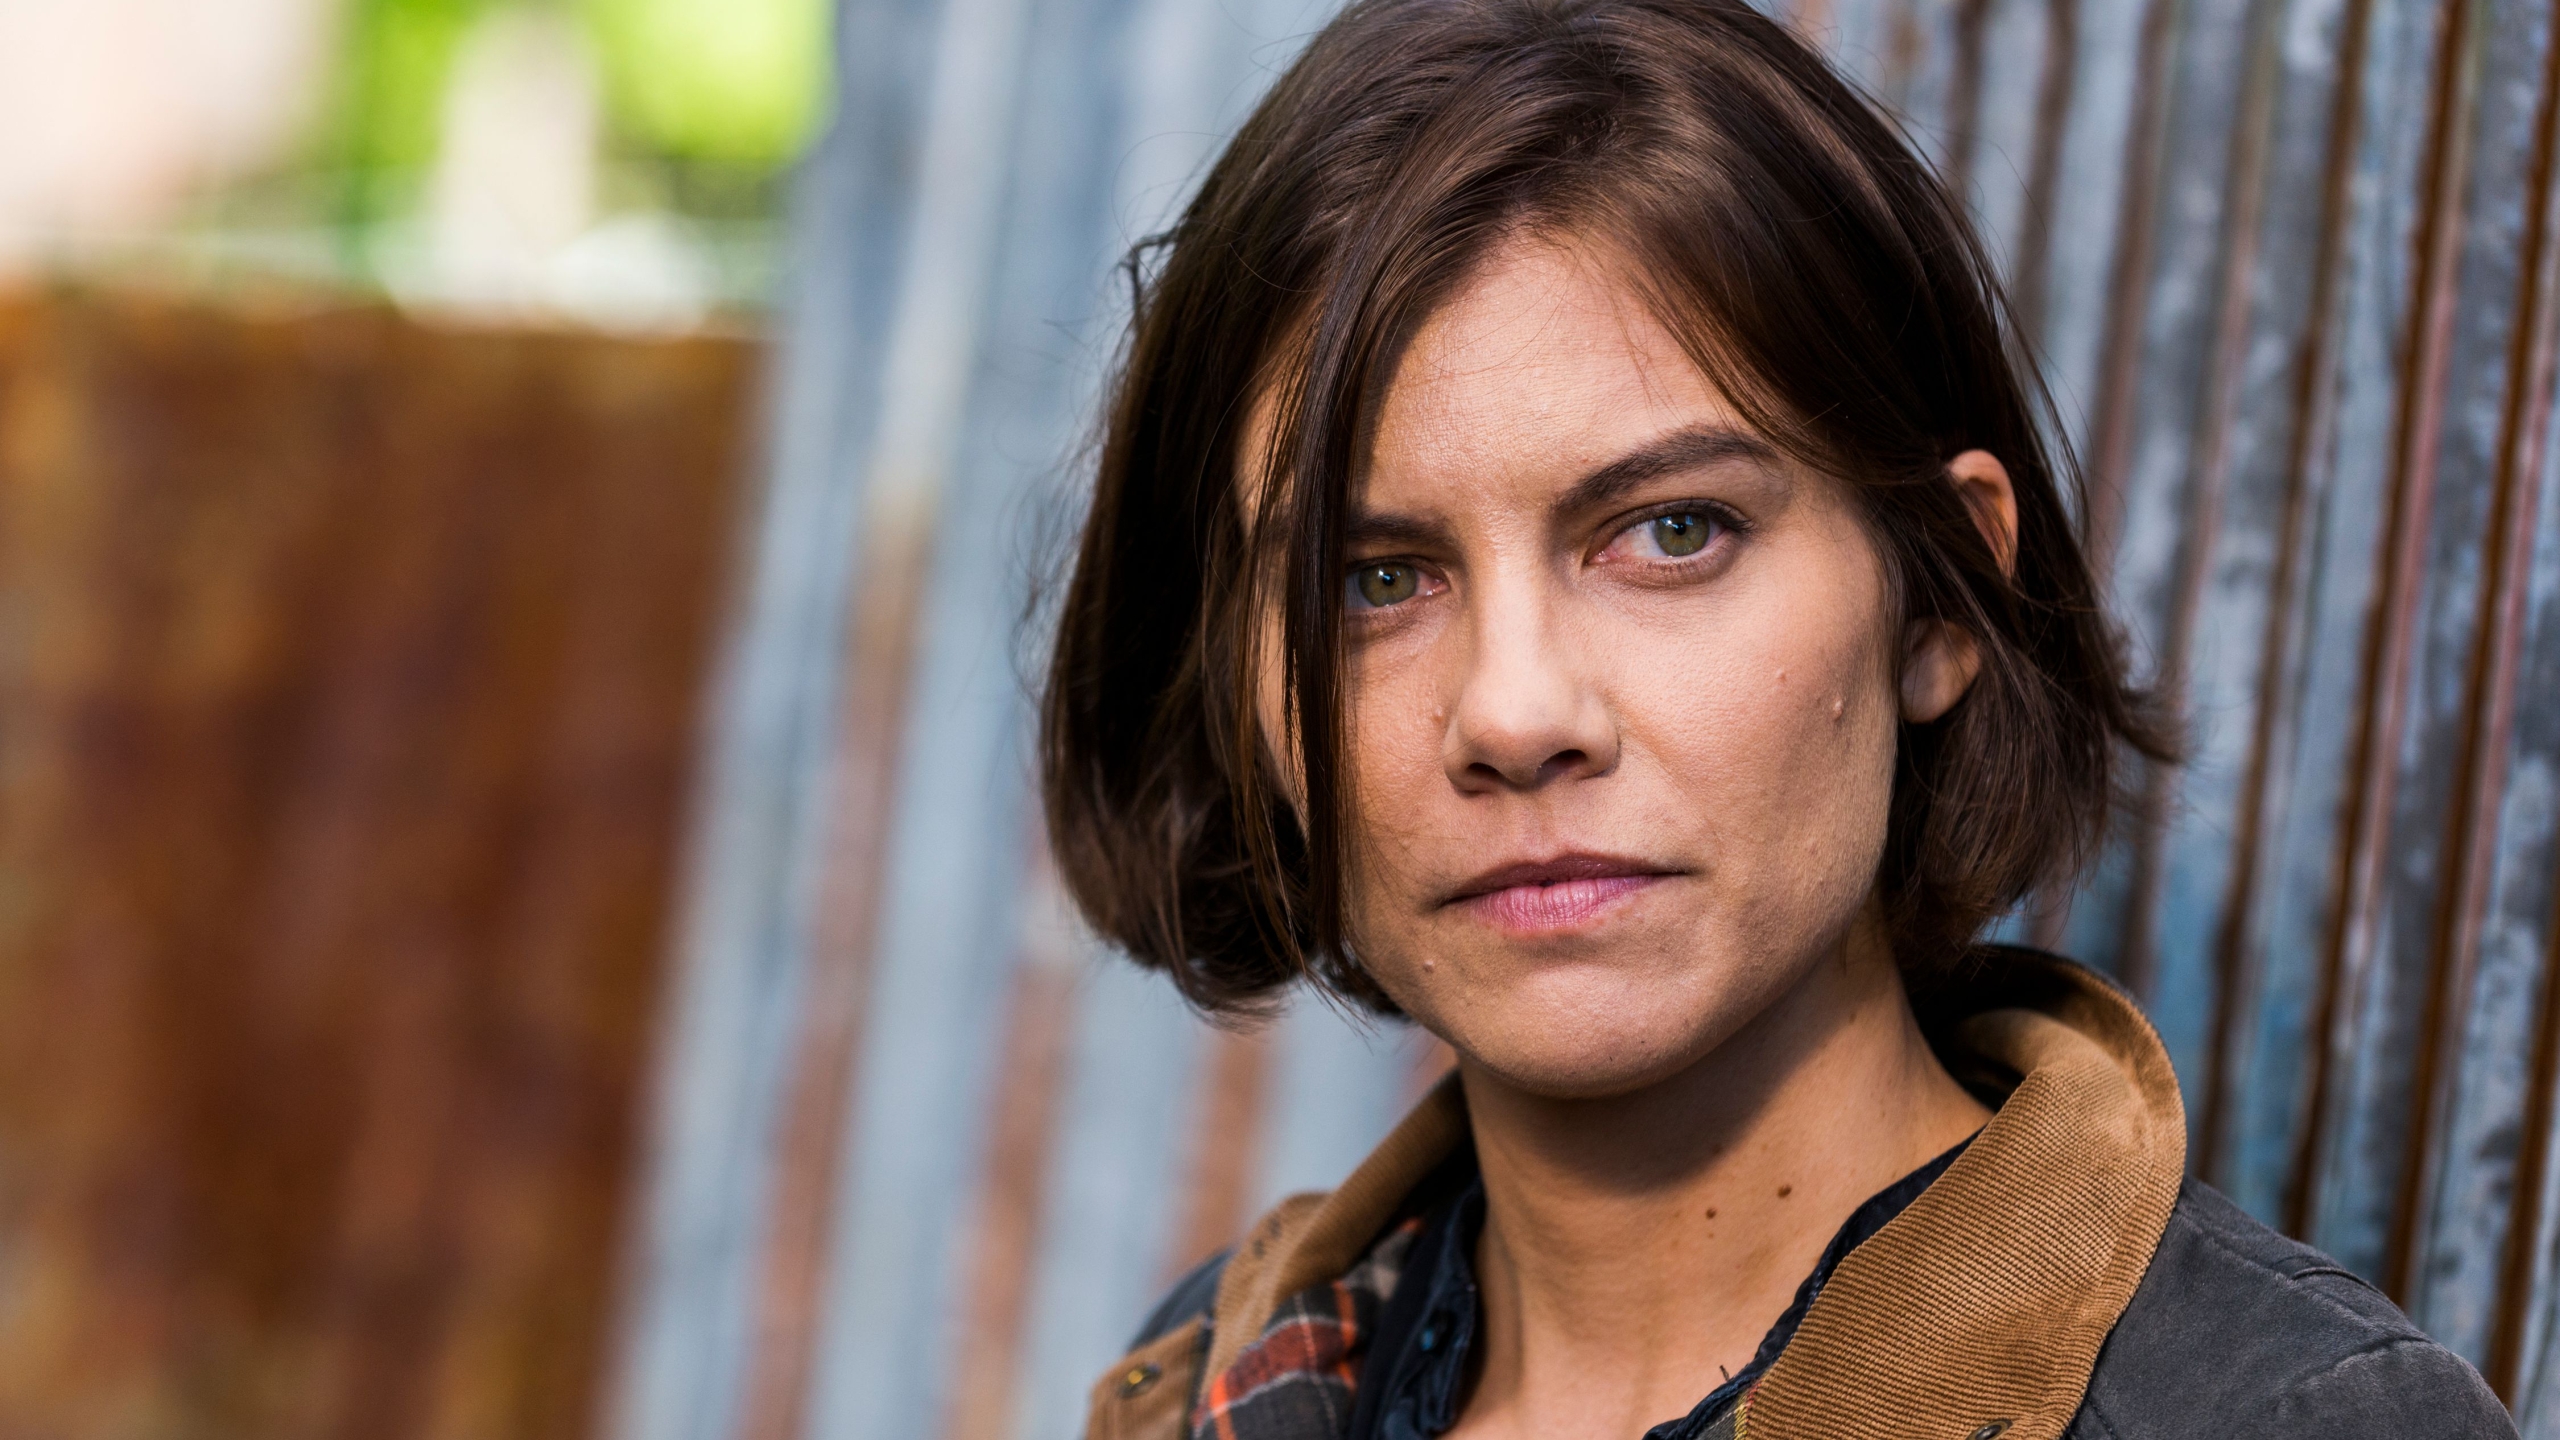 2560x1440 Lauren Cohan As Maggie Greene In The Walking Dead 1440p Images, Photos, Reviews